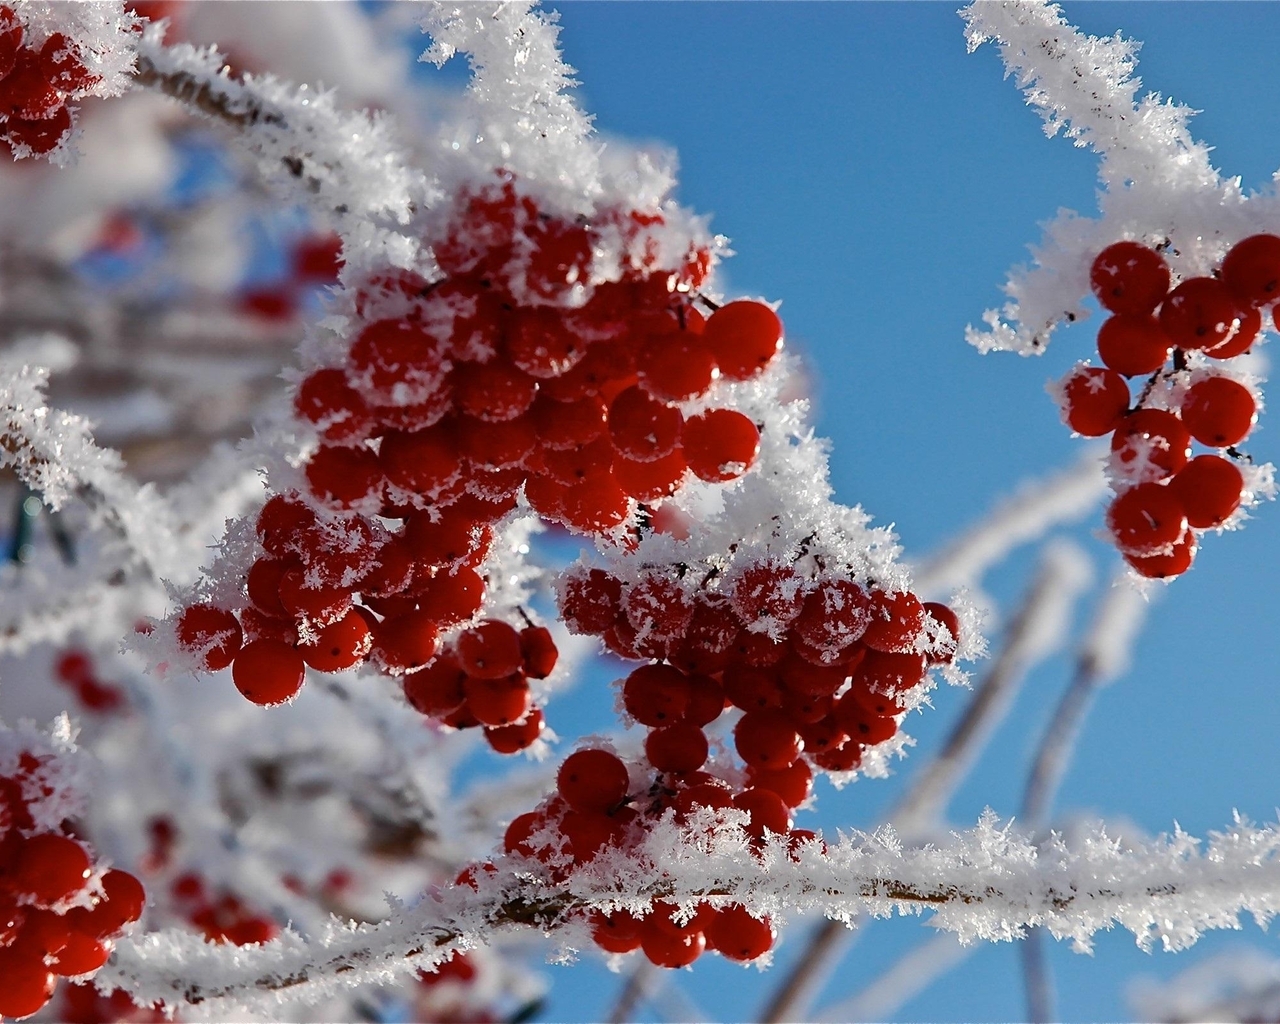 Image: Rowan, red, frost, snow, snowflakes, winter, branches, sky